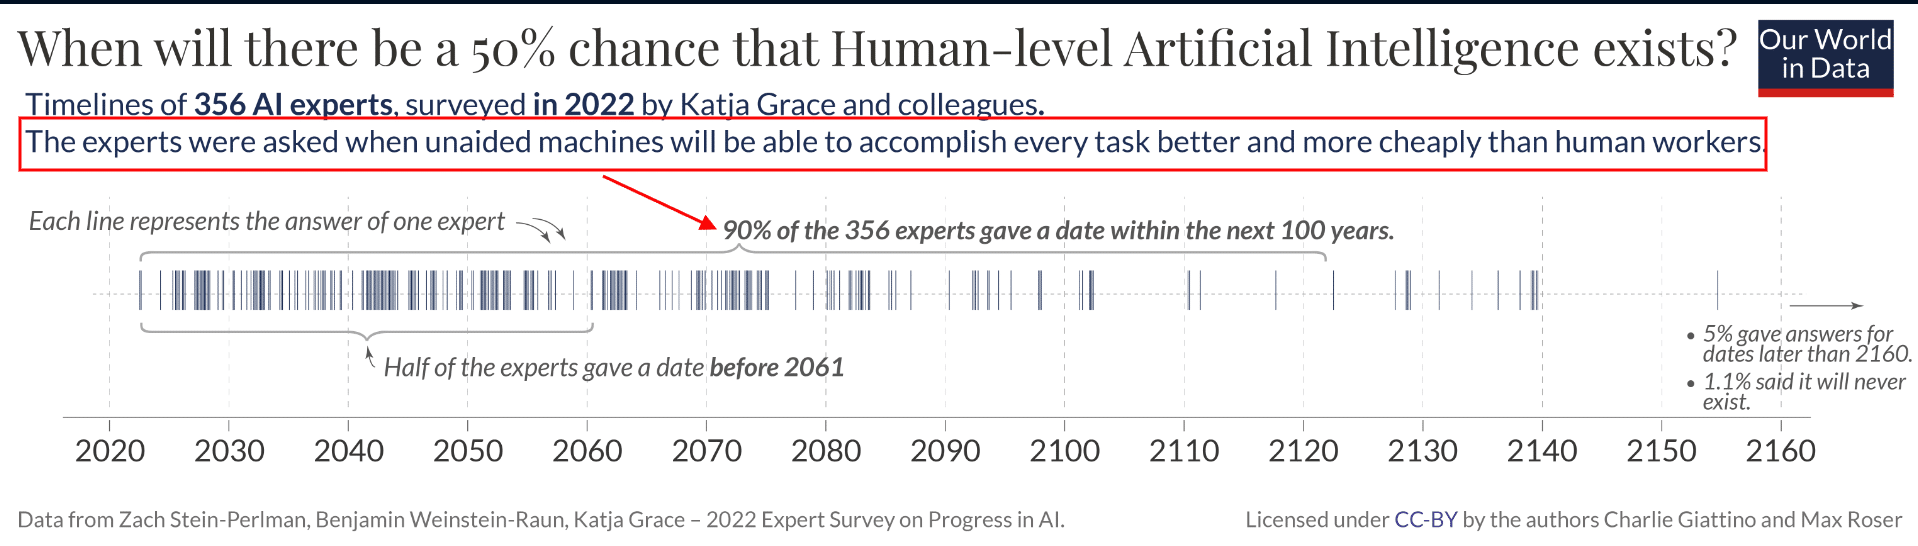 when will AI outpace humans - survey by our world in data